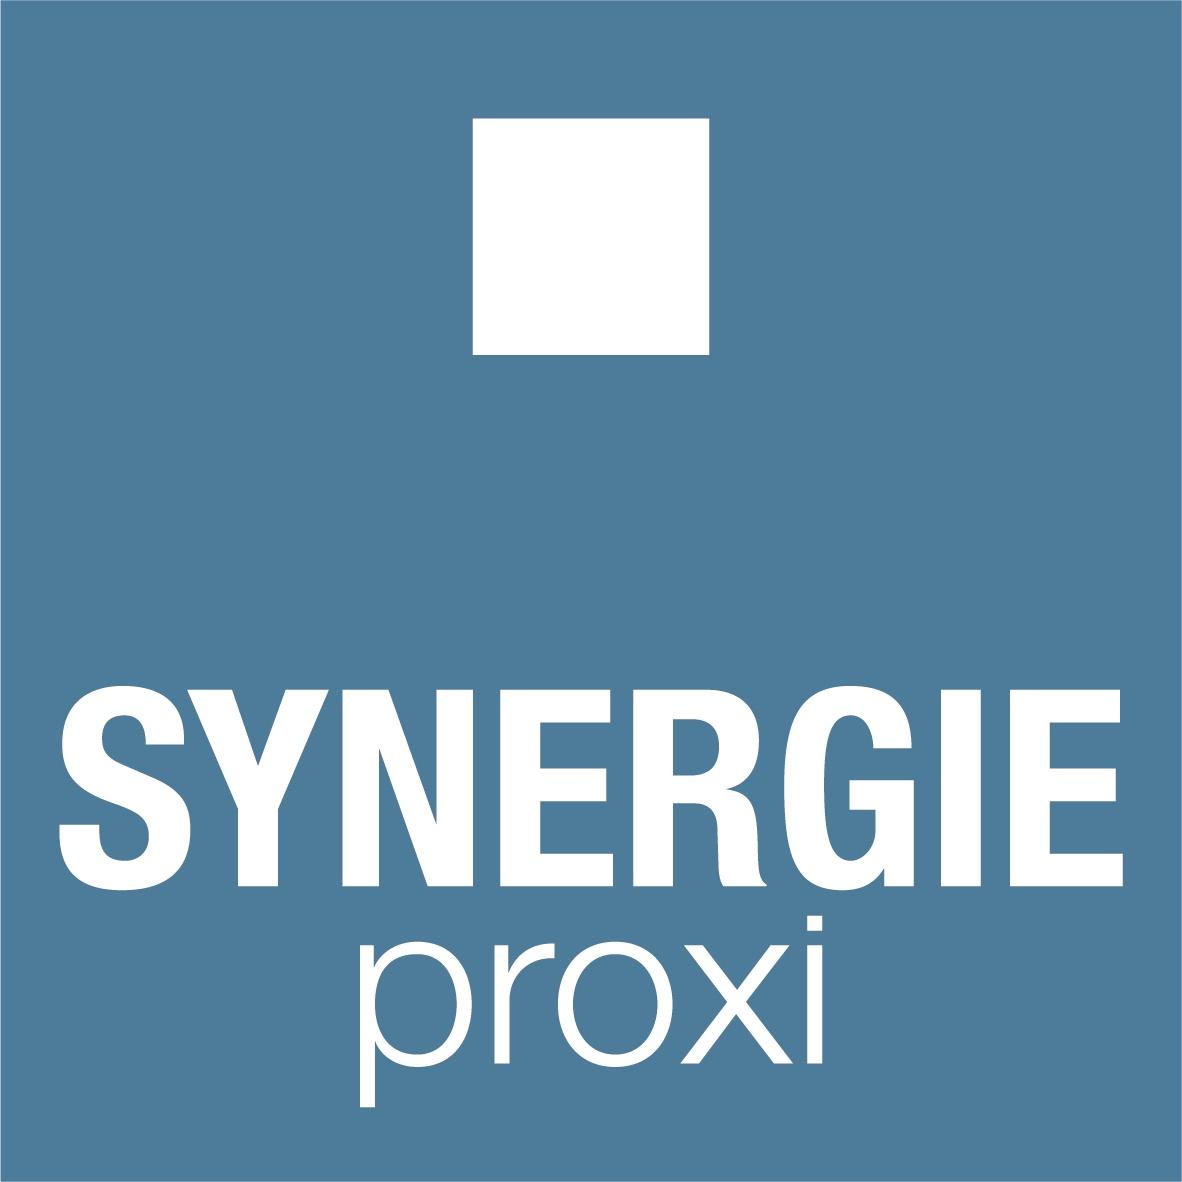 Synergie Offranville